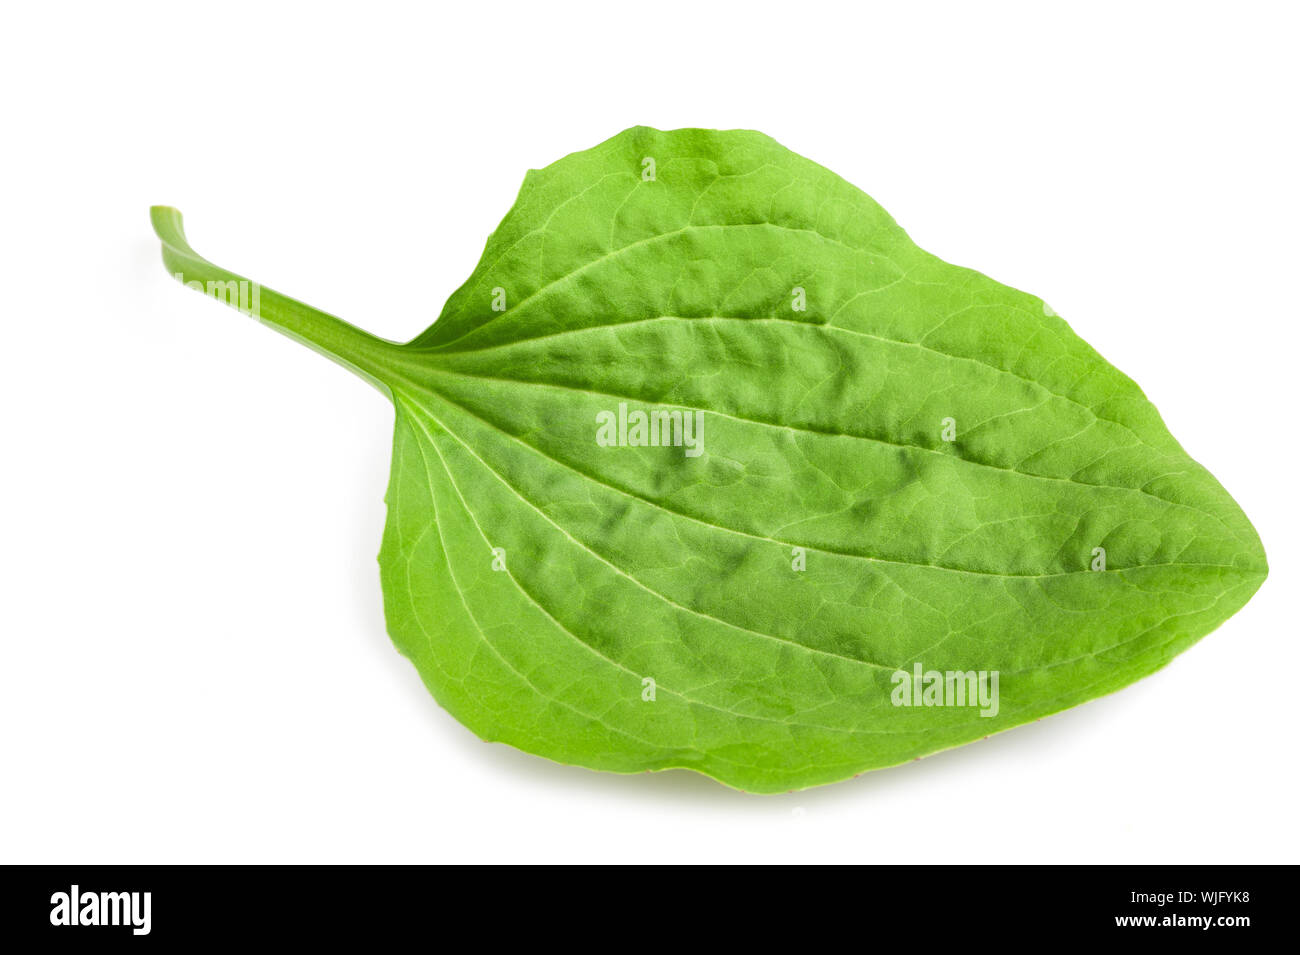 greater plantain leaf isolated on white background Stock Photo